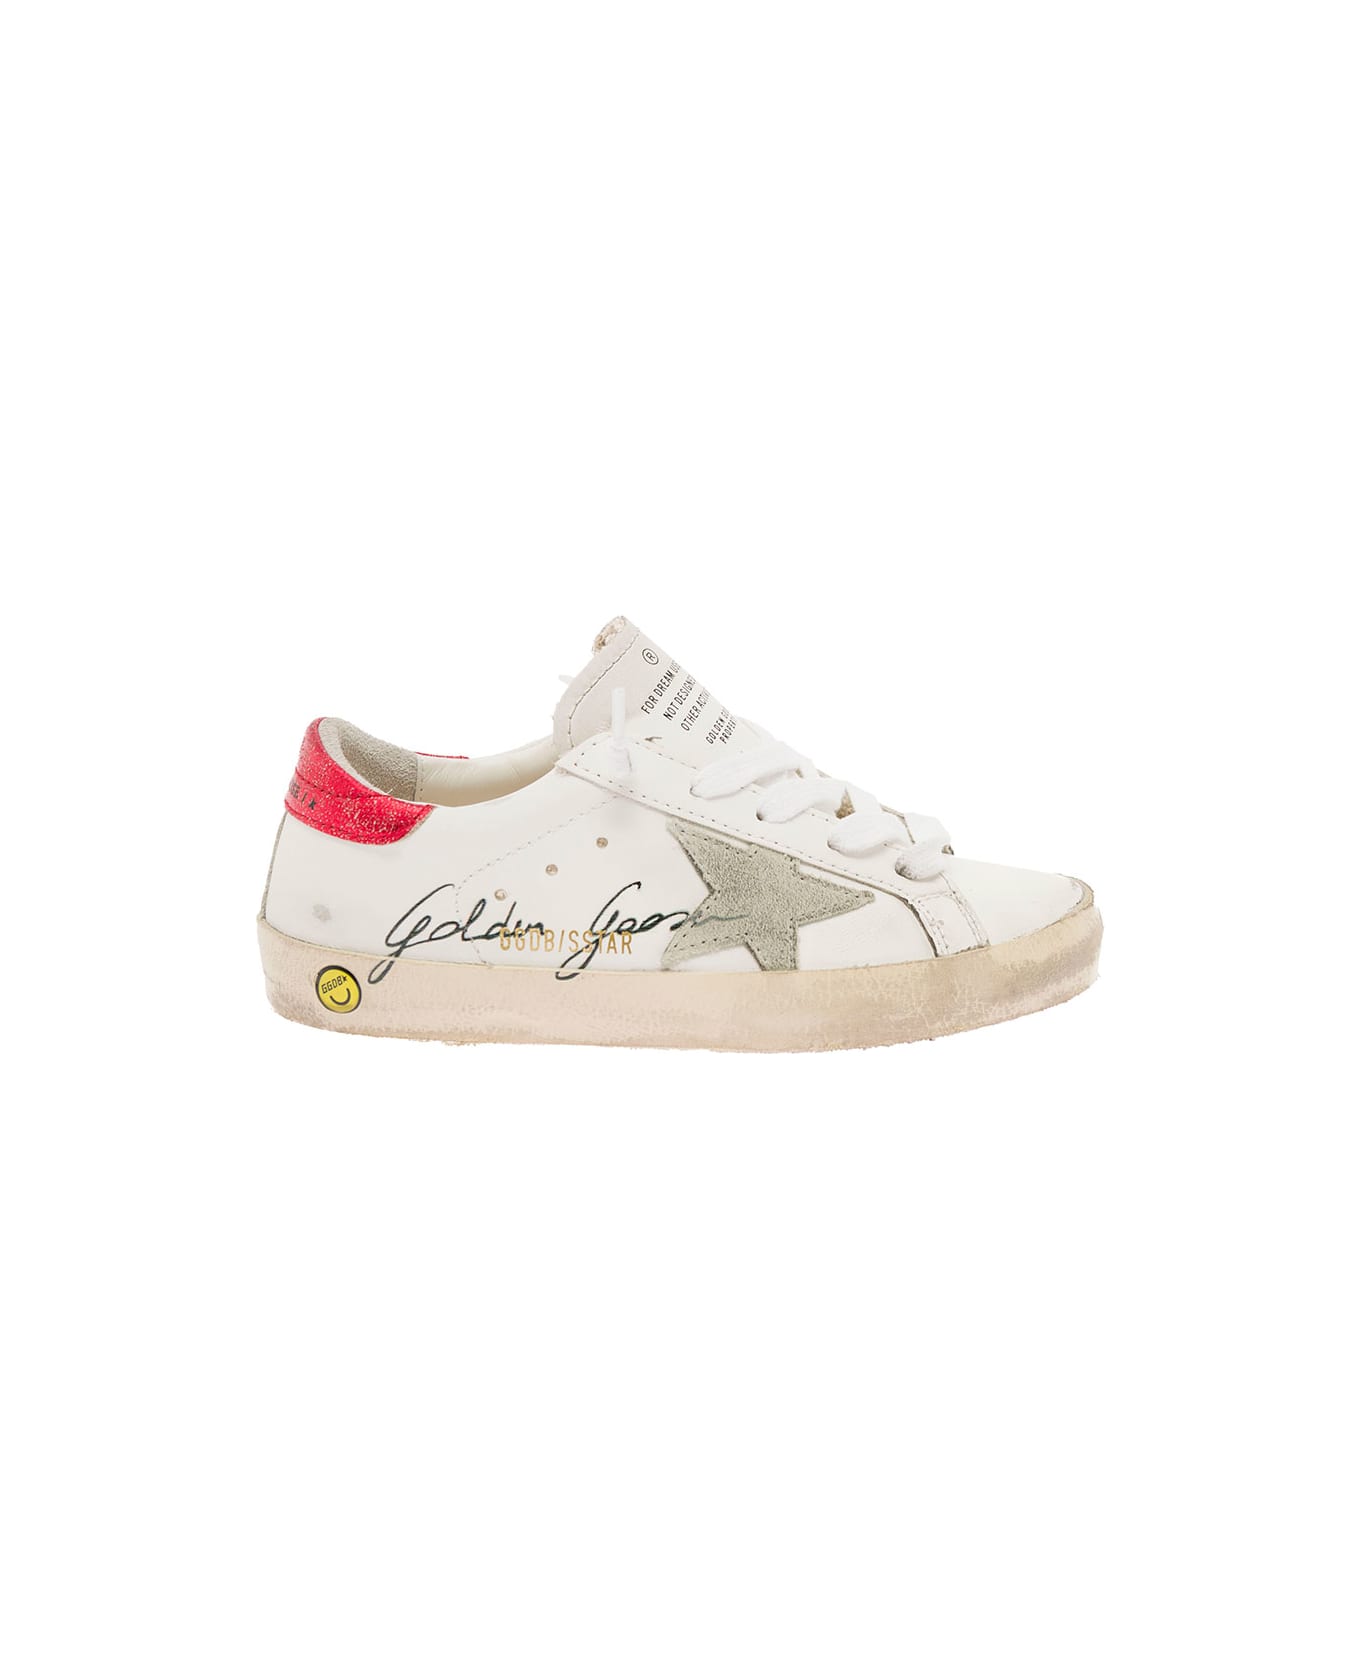 Golden Goose Star Vintage White Leather Sneakers With Logo Signature Golden Goose Kids Boy - White